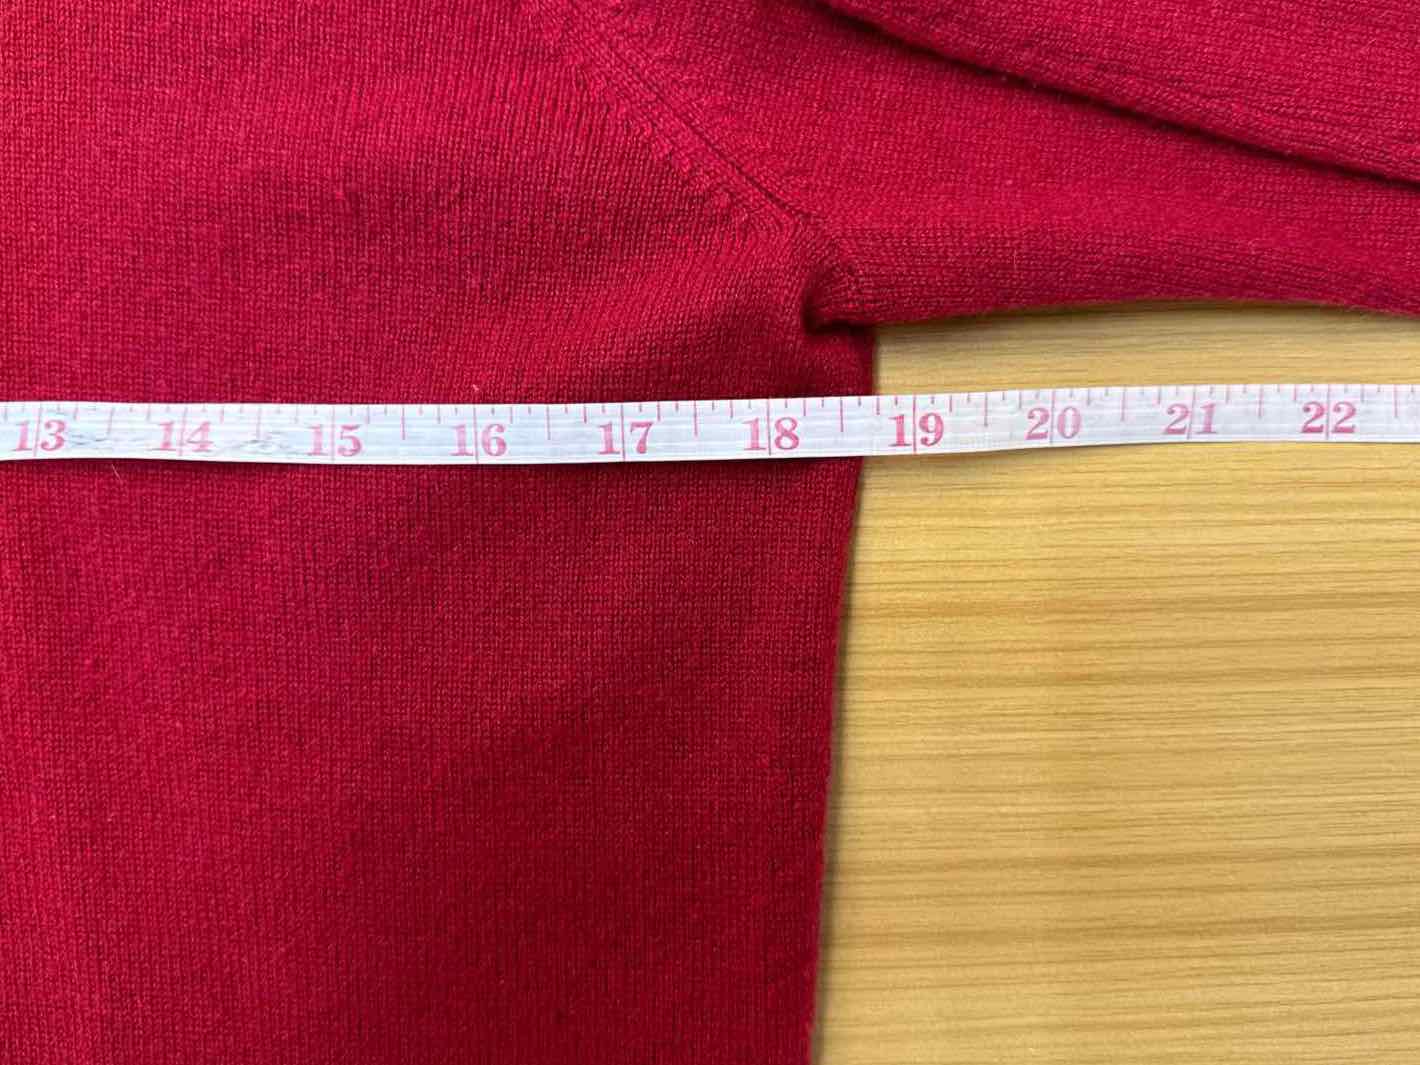 Brooks Brothers Red 100% Cashmere Sweater Size M